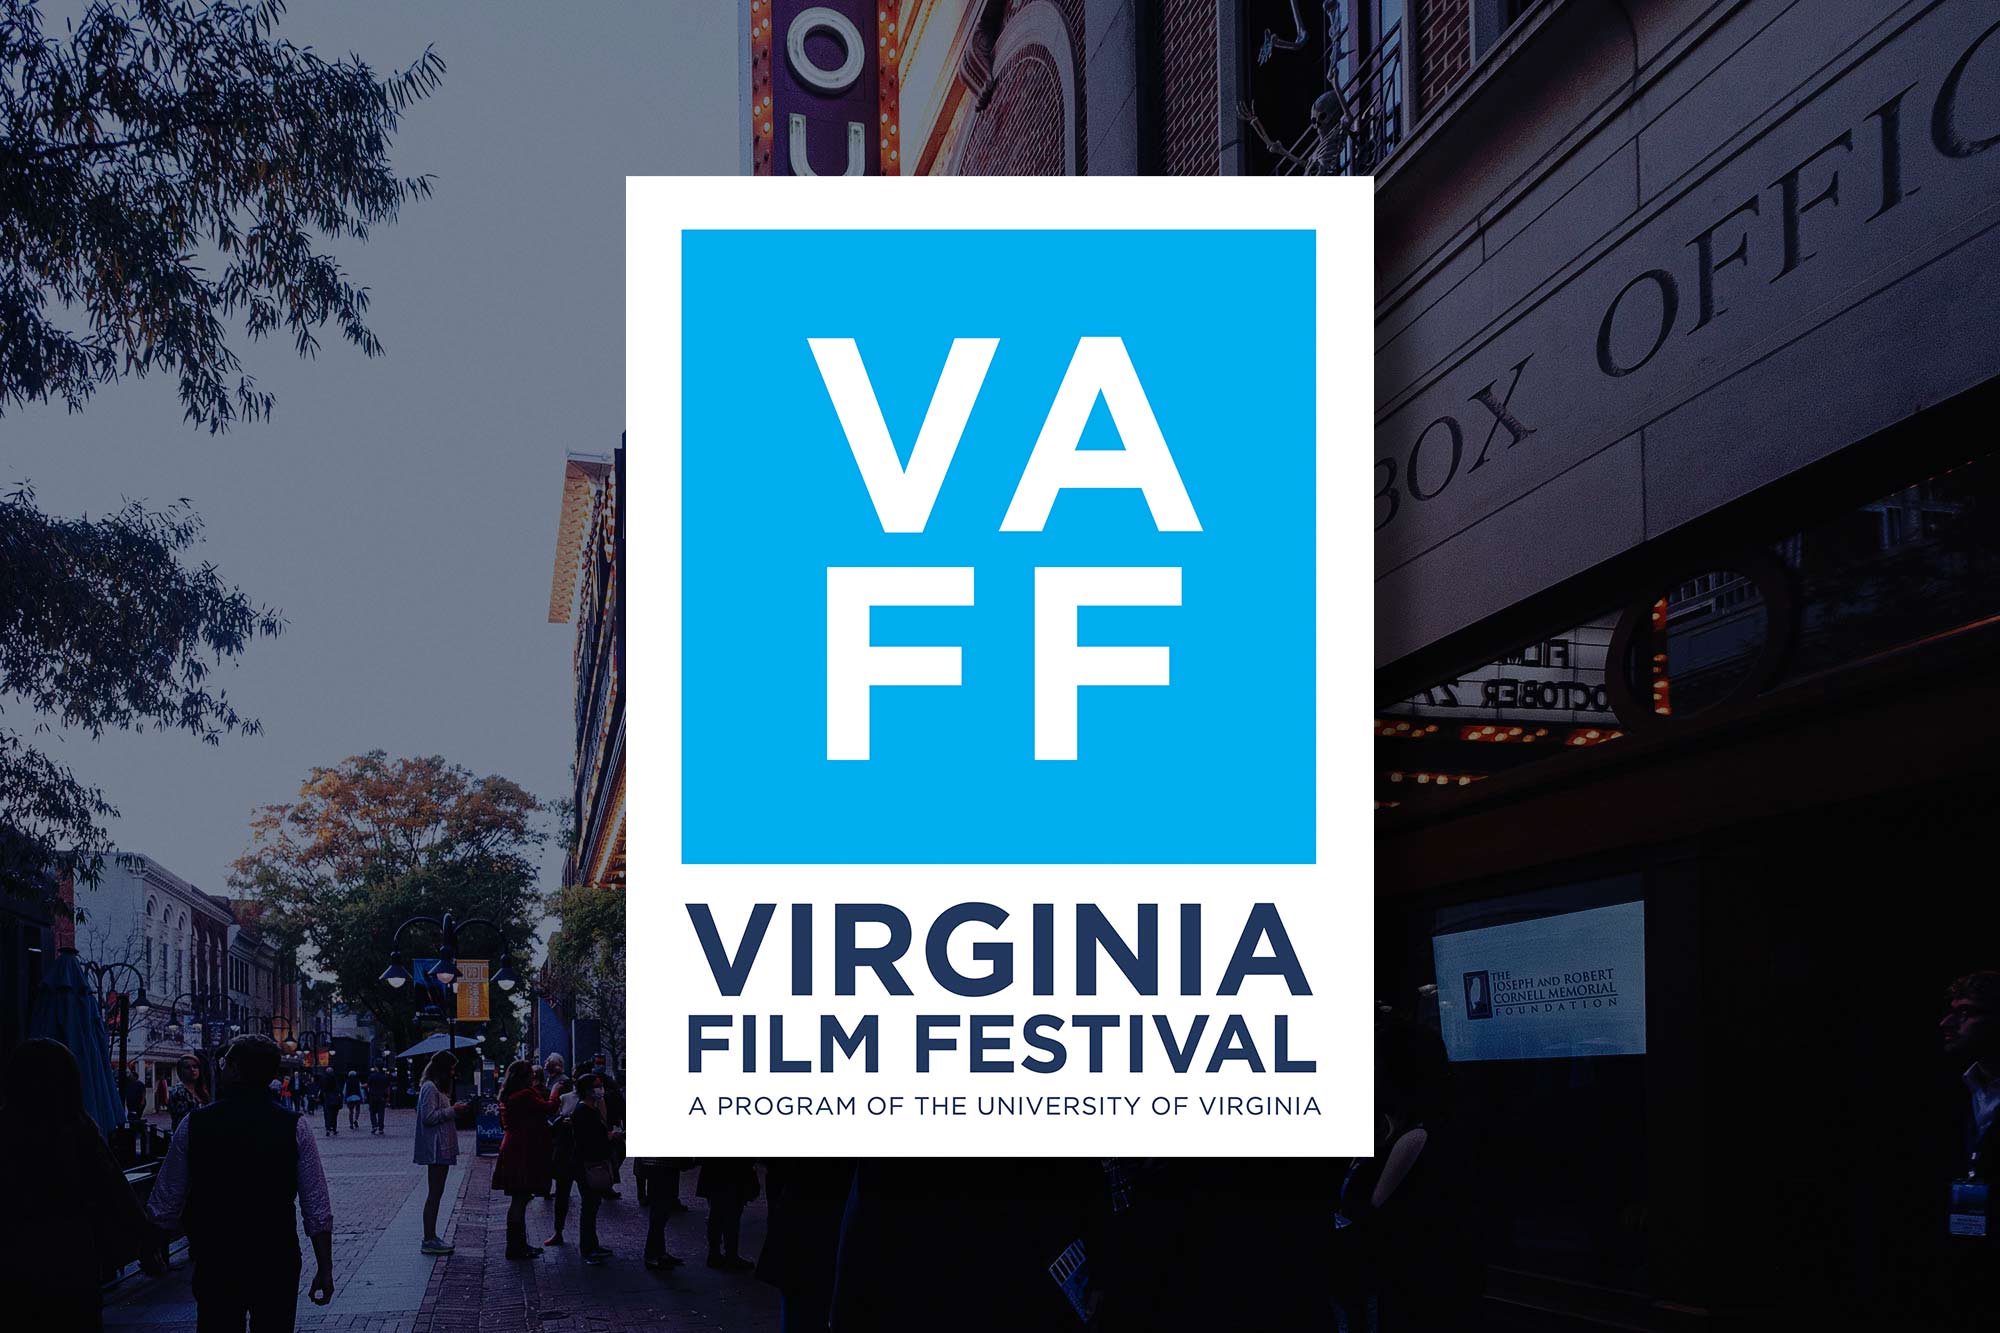 A program of the University of Virginia, the festival is celebrating its 35th year, and events are held at various locations. (Photo by Eze Amos)